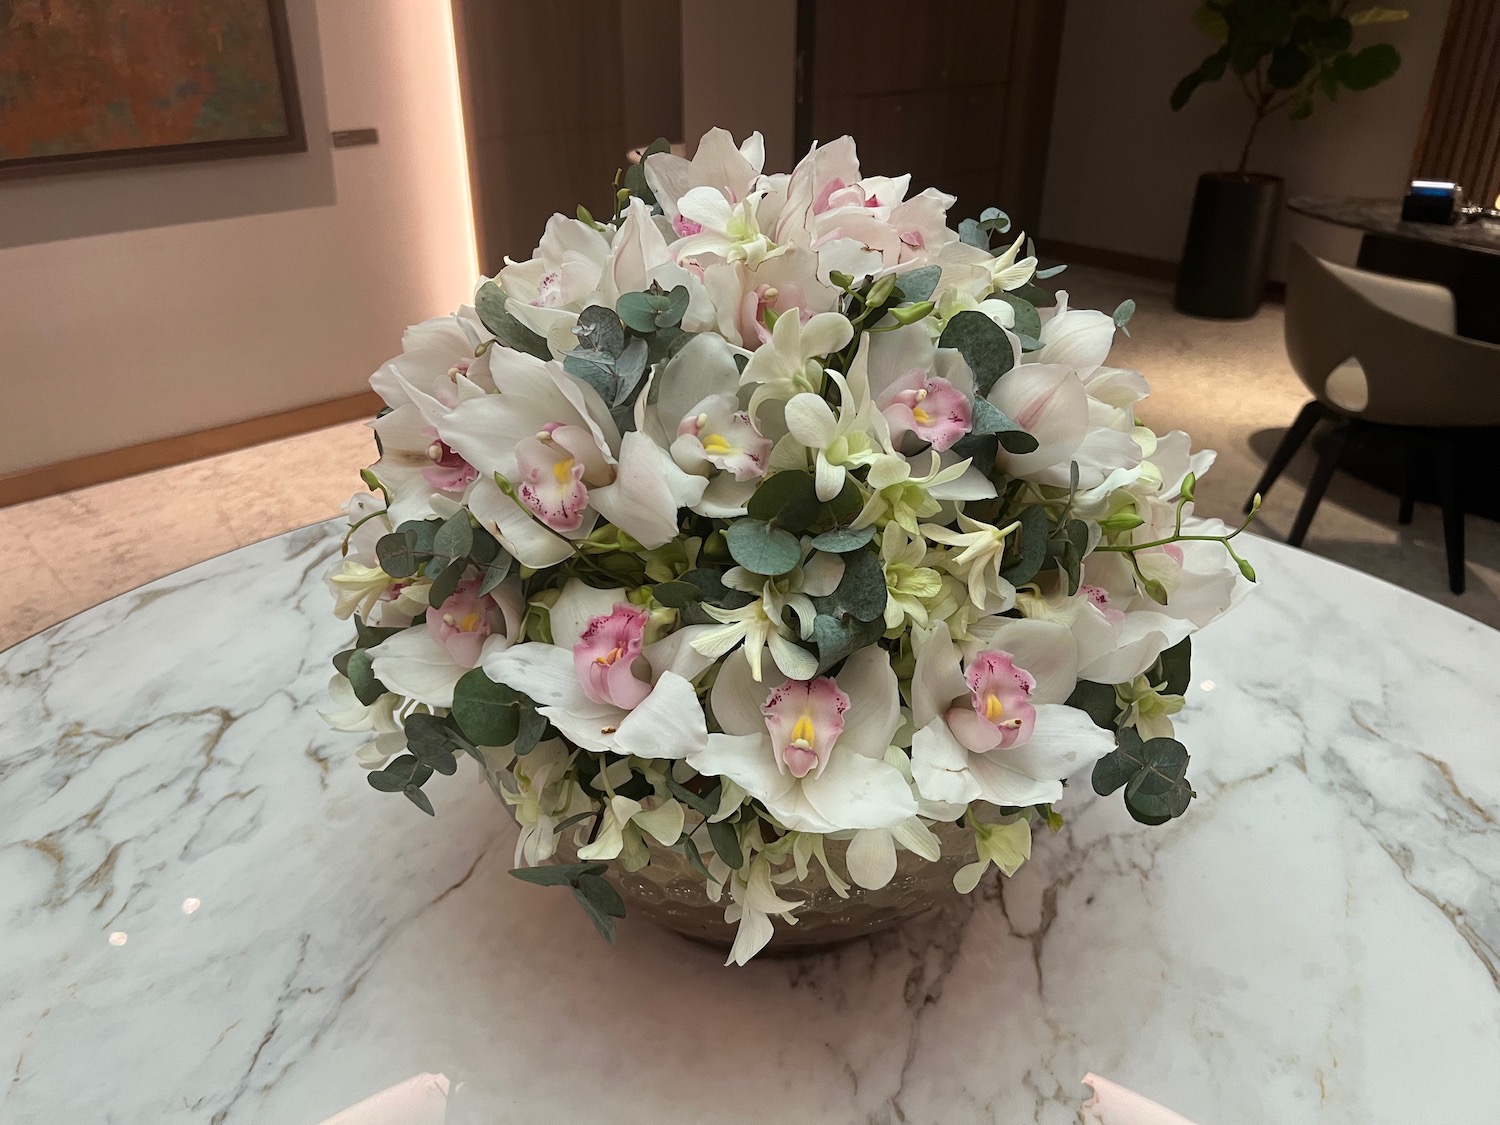 a bouquet of flowers on a marble table